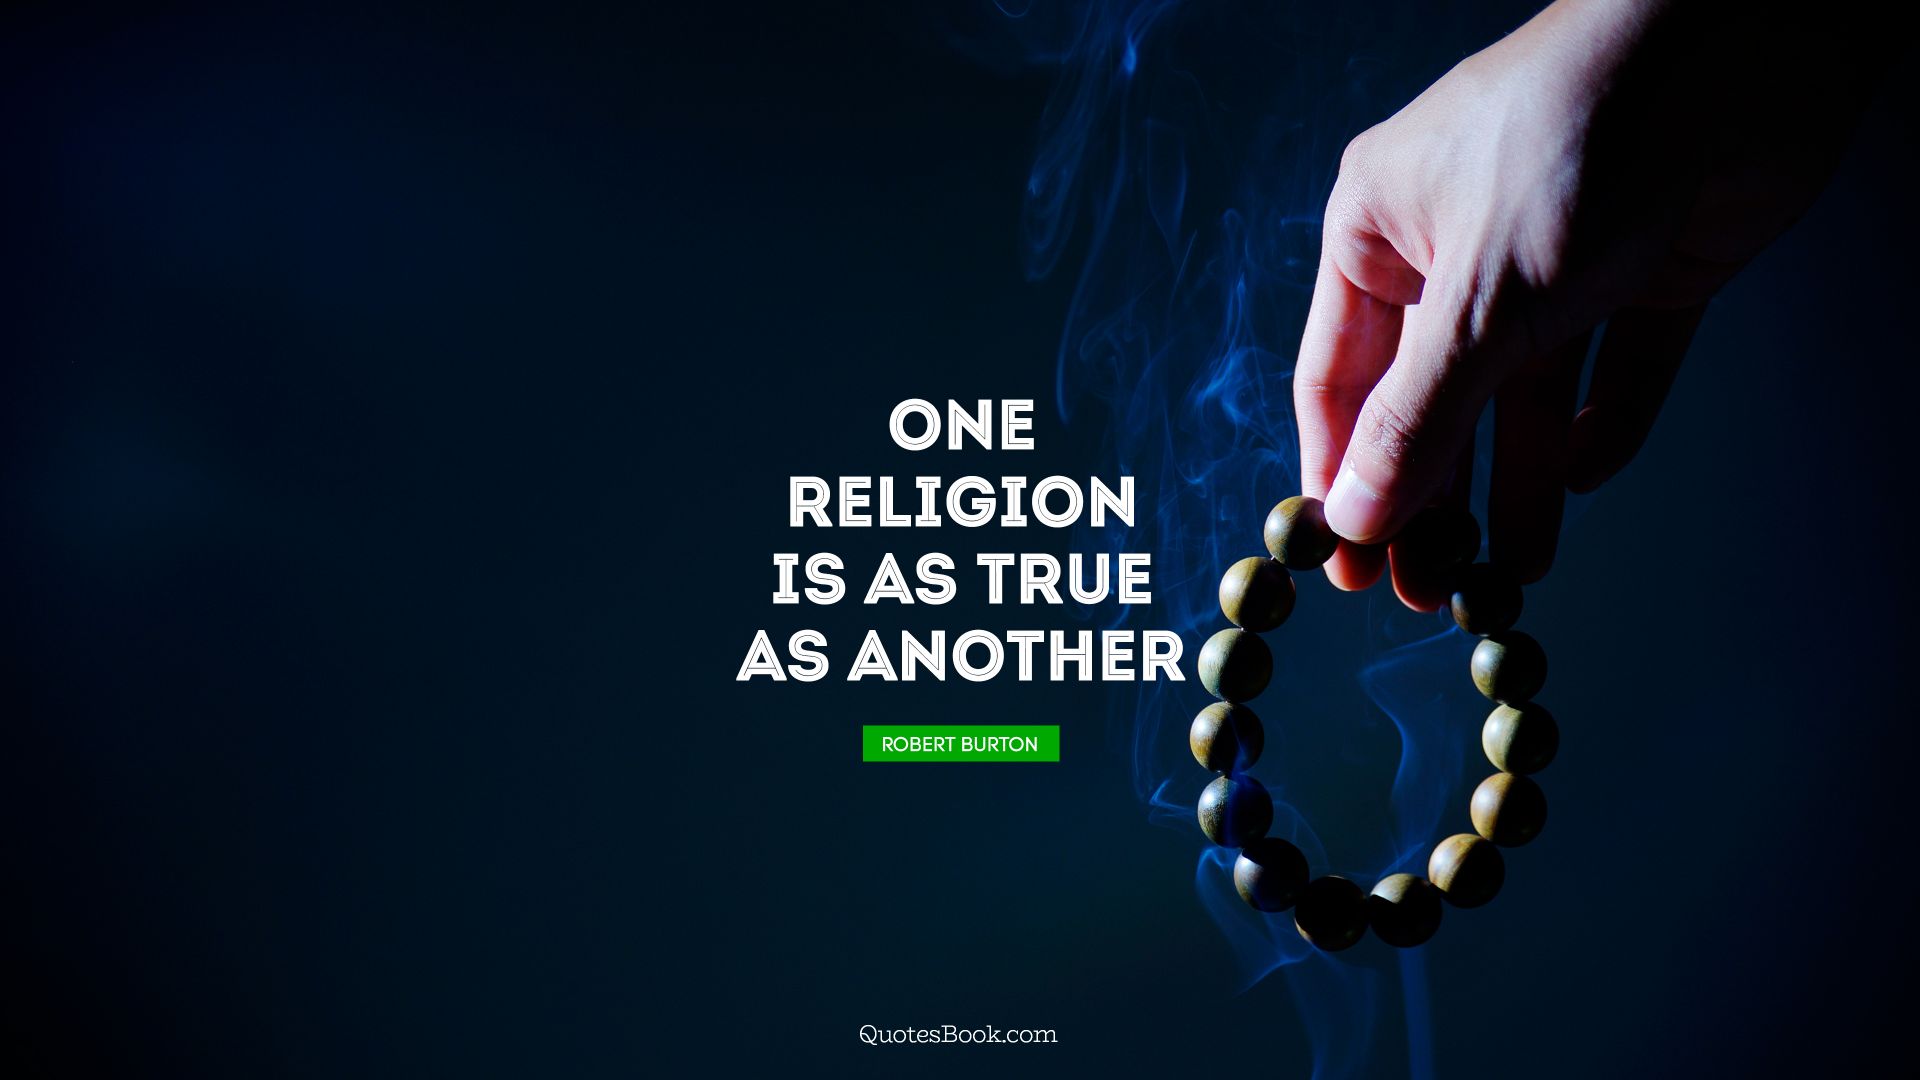 One religion is as true as another. - Quote by Robert Burton